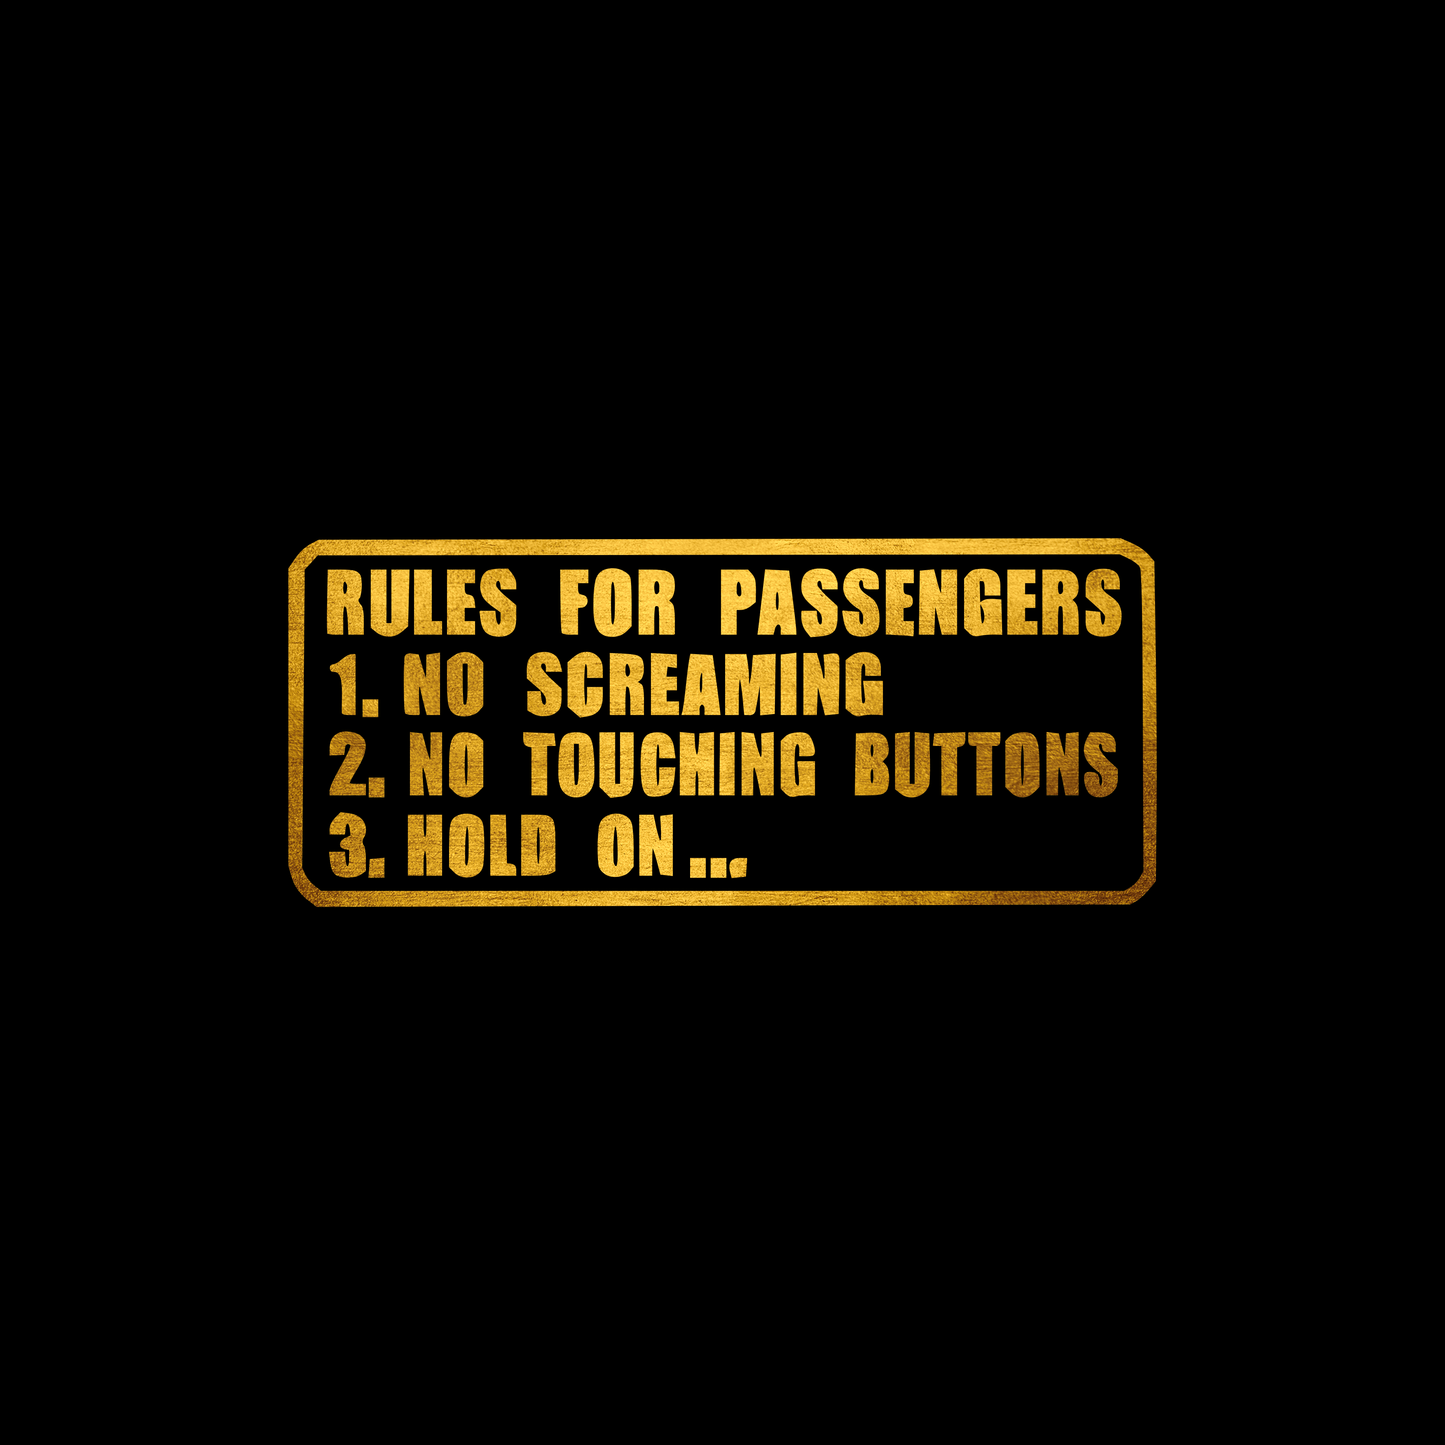 Rules for passengers sticker decal